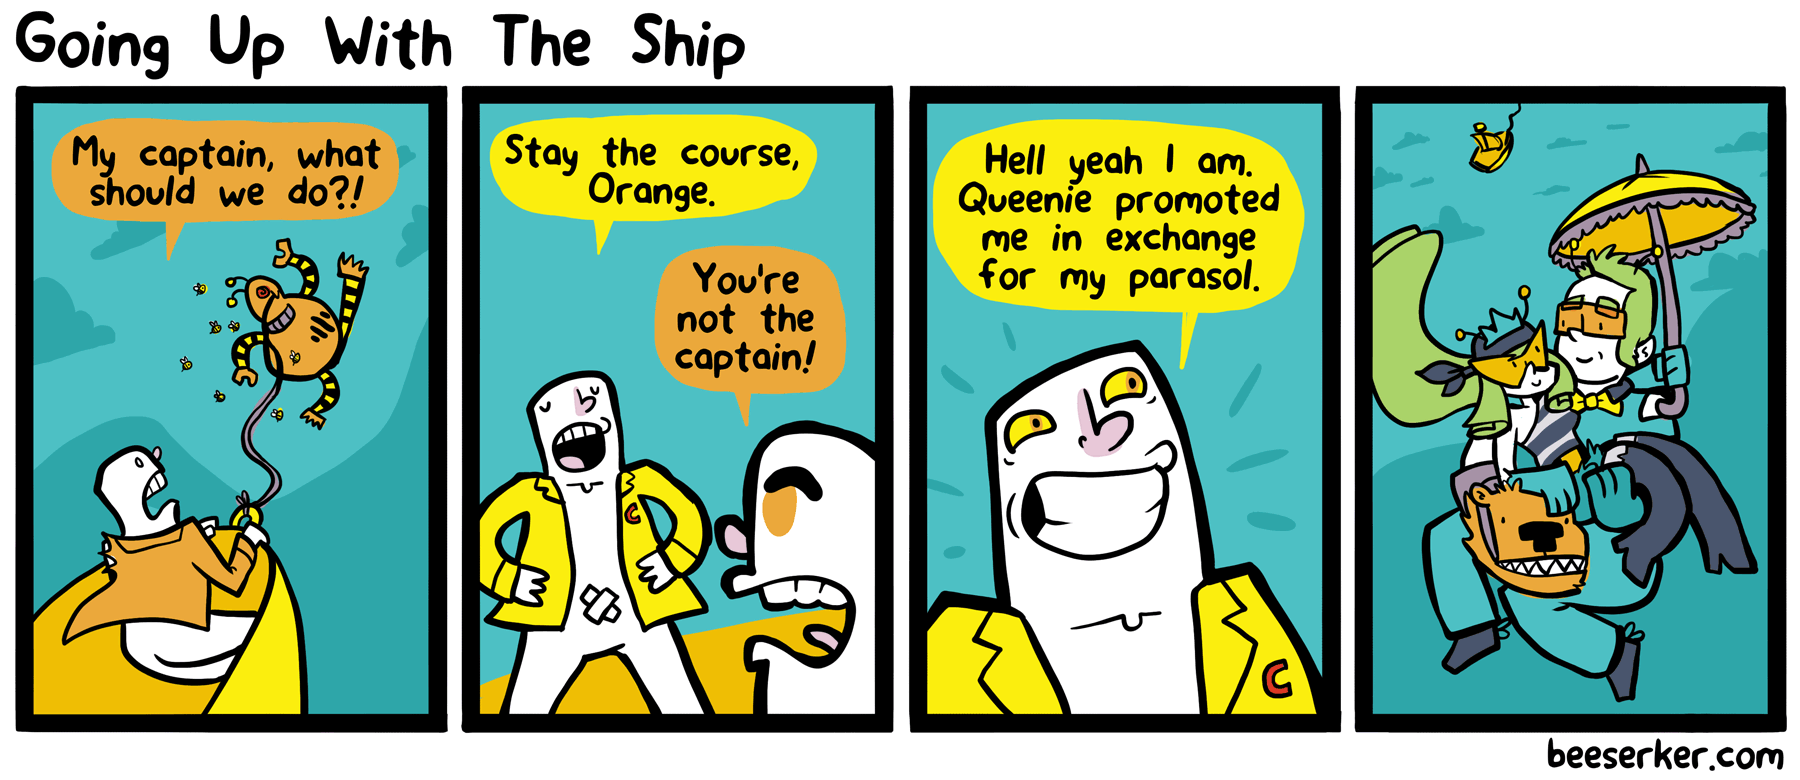 Going Up With The Ship